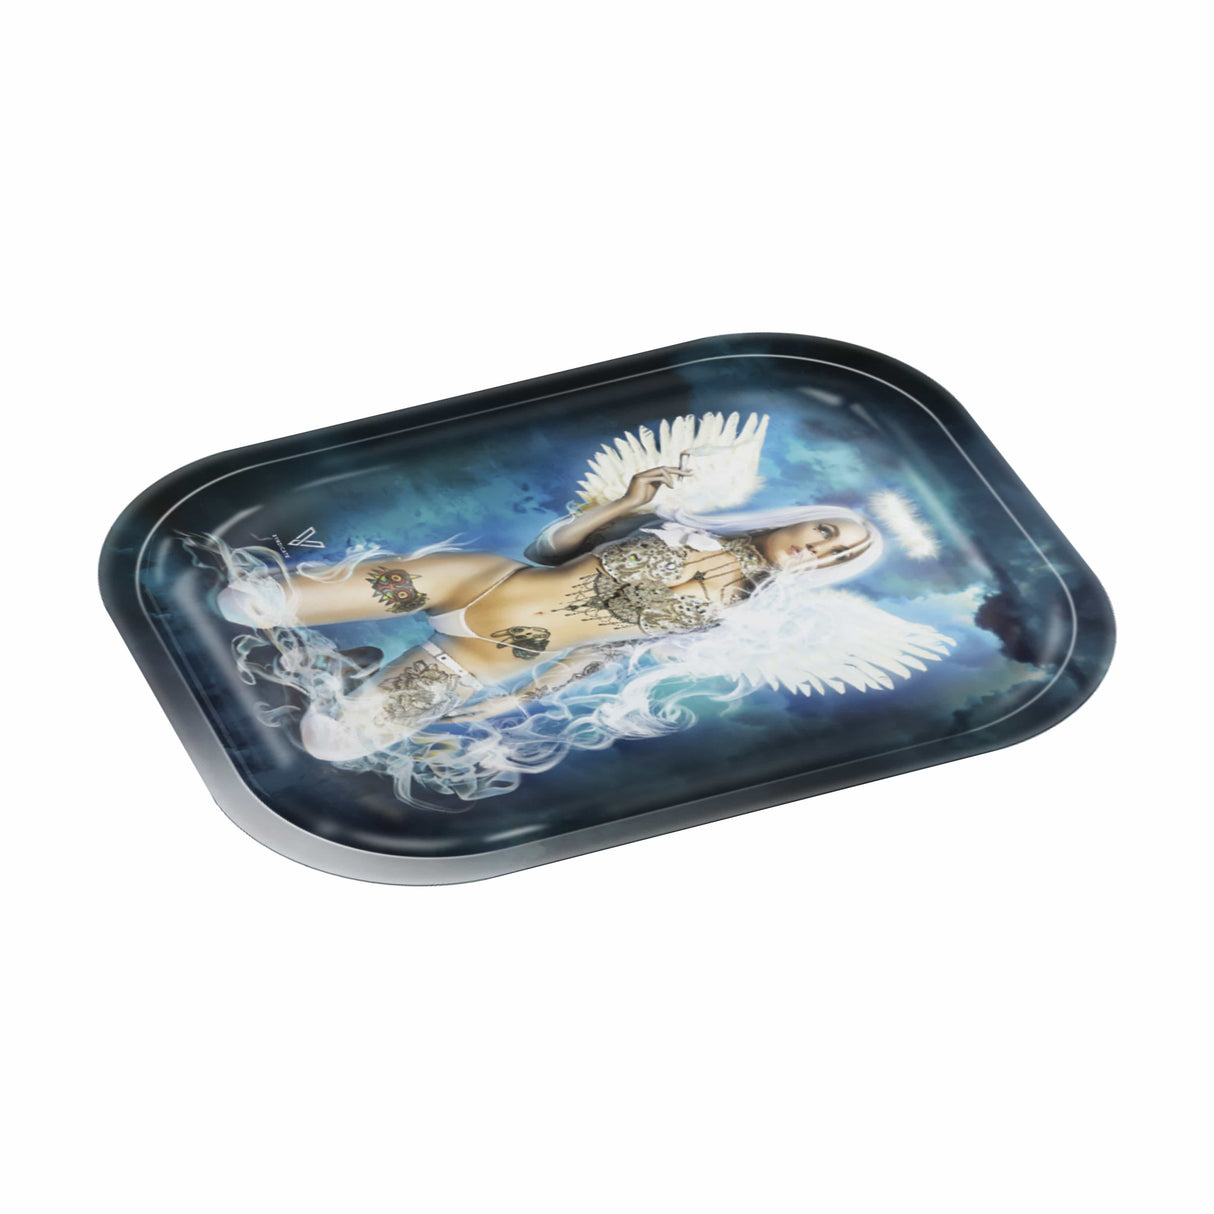 V Syndicate W33dhead Metal Rollin' Tray with Angelic Novelty Design - Medium Size